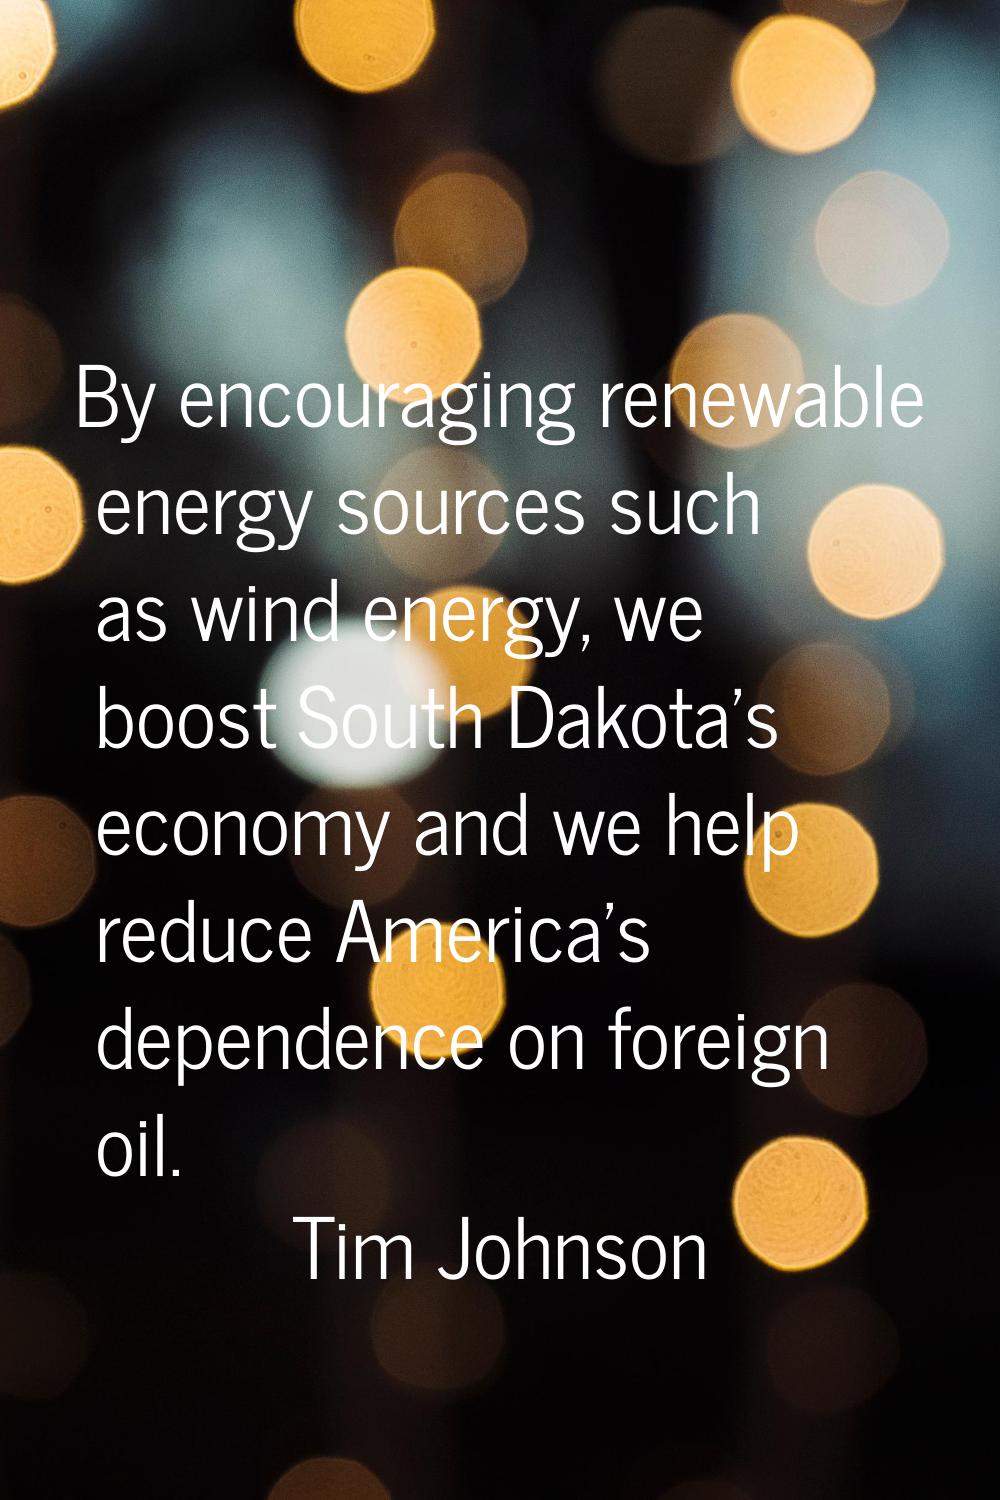 By encouraging renewable energy sources such as wind energy, we boost South Dakota's economy and we